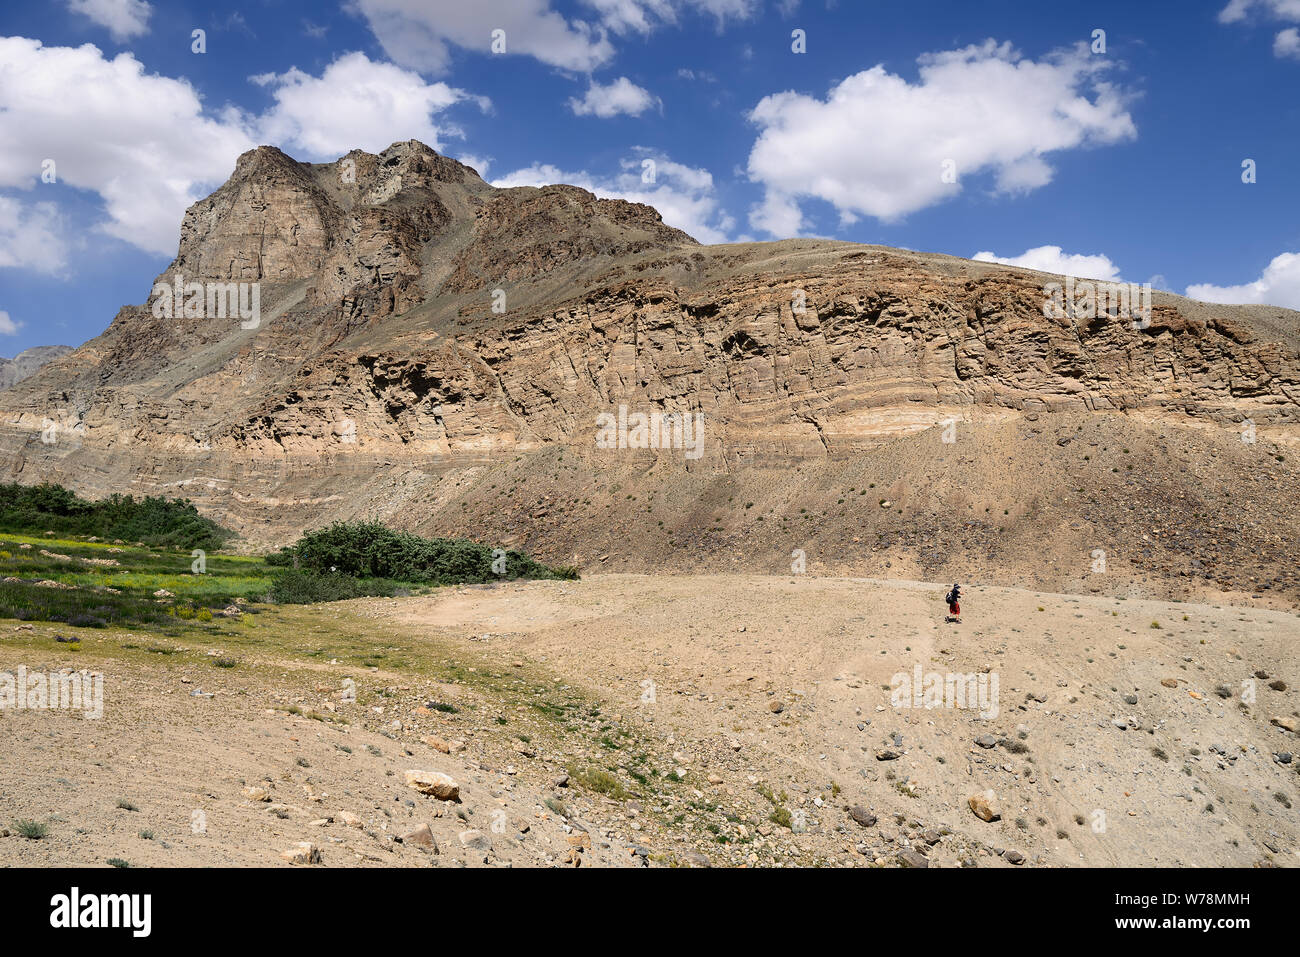 View on the remote Shakhdara Valley in the Pamir mountain, Tajikistan, Central Asia. Stock Photo